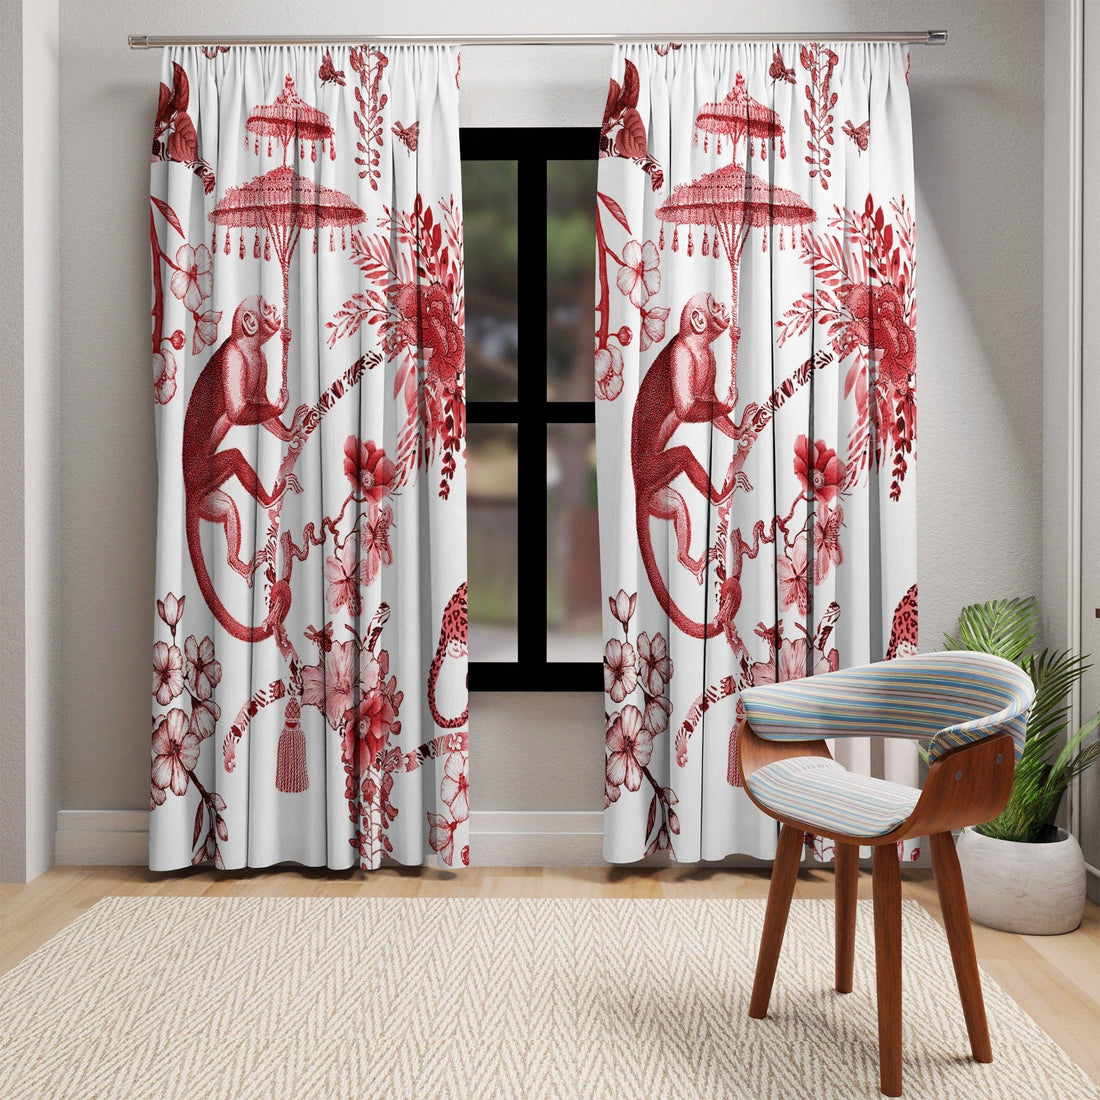 Kate McEnroe New York Chinoiserie Jungle Botanical Toile Window Curtains, Red, White Chinoiserie Floral Drapes, Country Farmhouse Decor - 131482623Window CurtainsW3S - CHI - RED - SH1